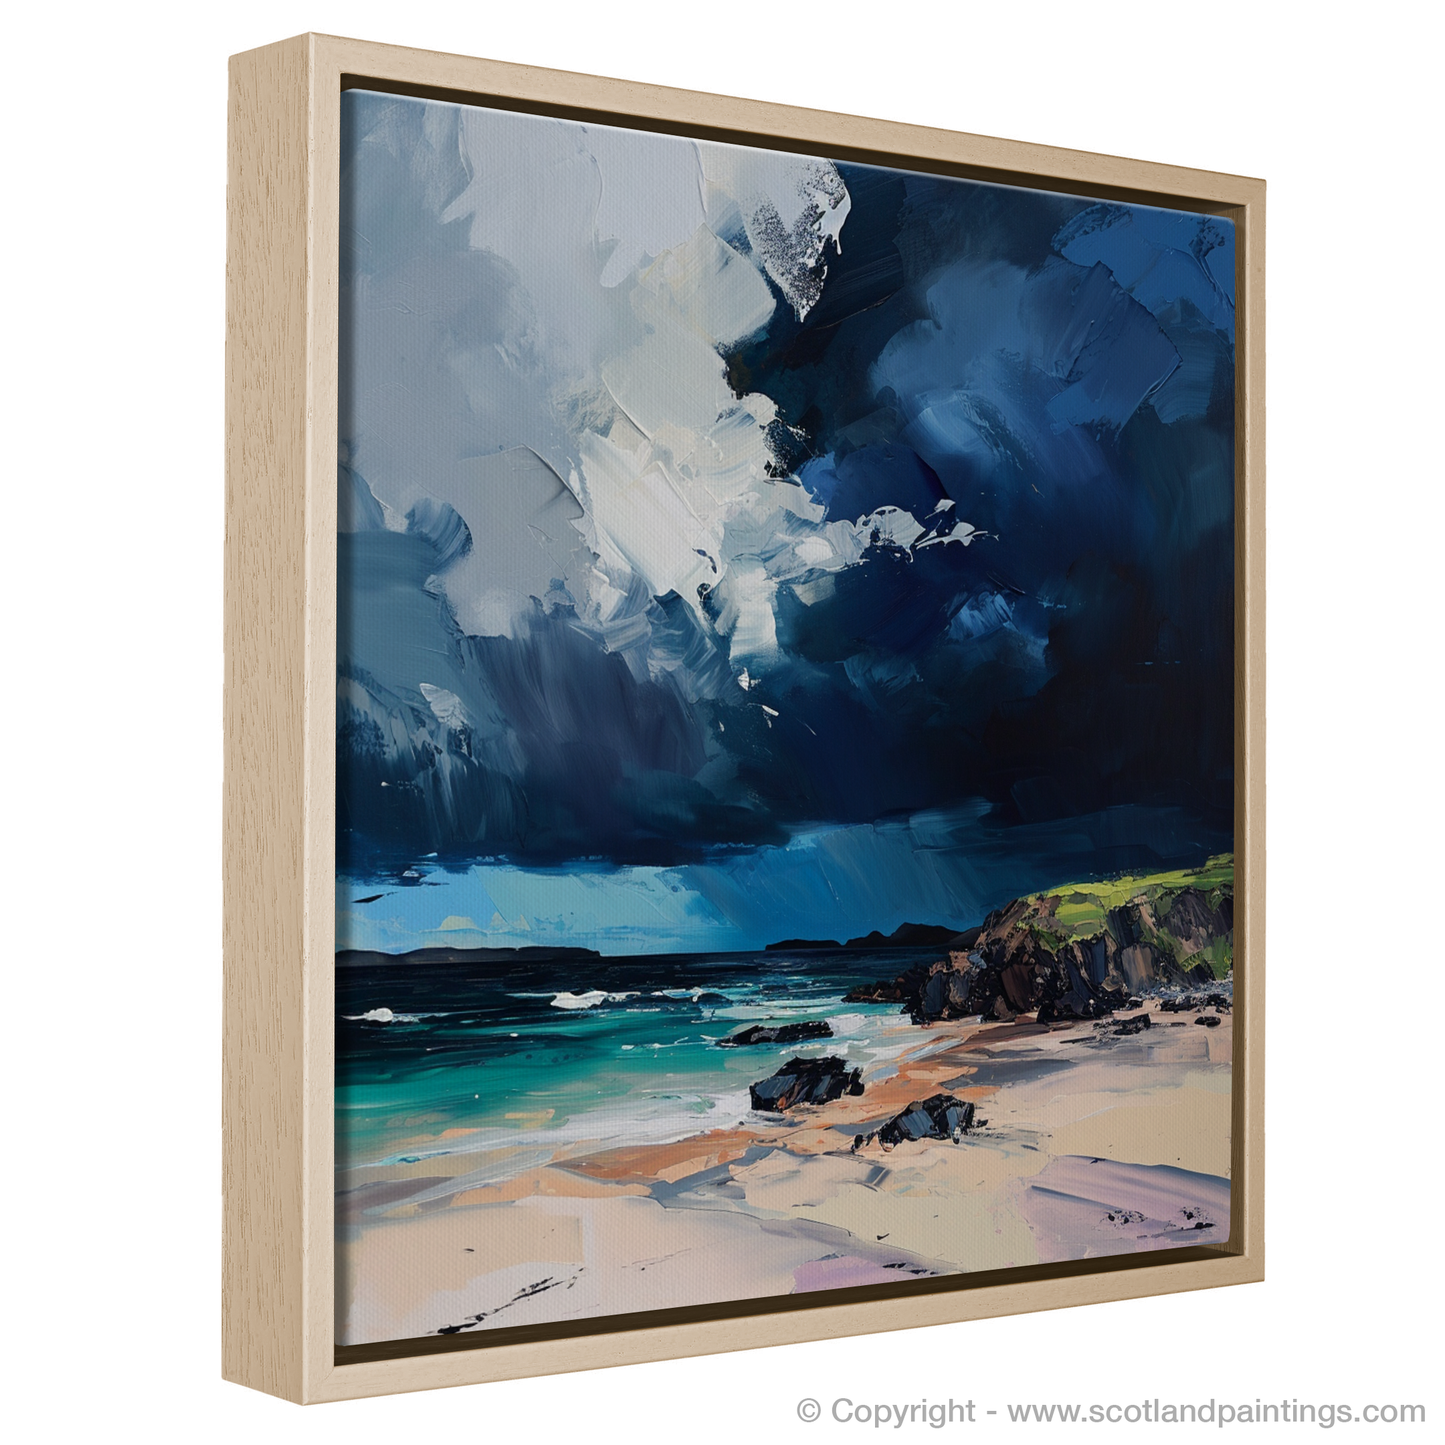 Painting and Art Print of Balnakeil Bay with a stormy sky entitled "Stormy Embrace of Balnakeil Bay".